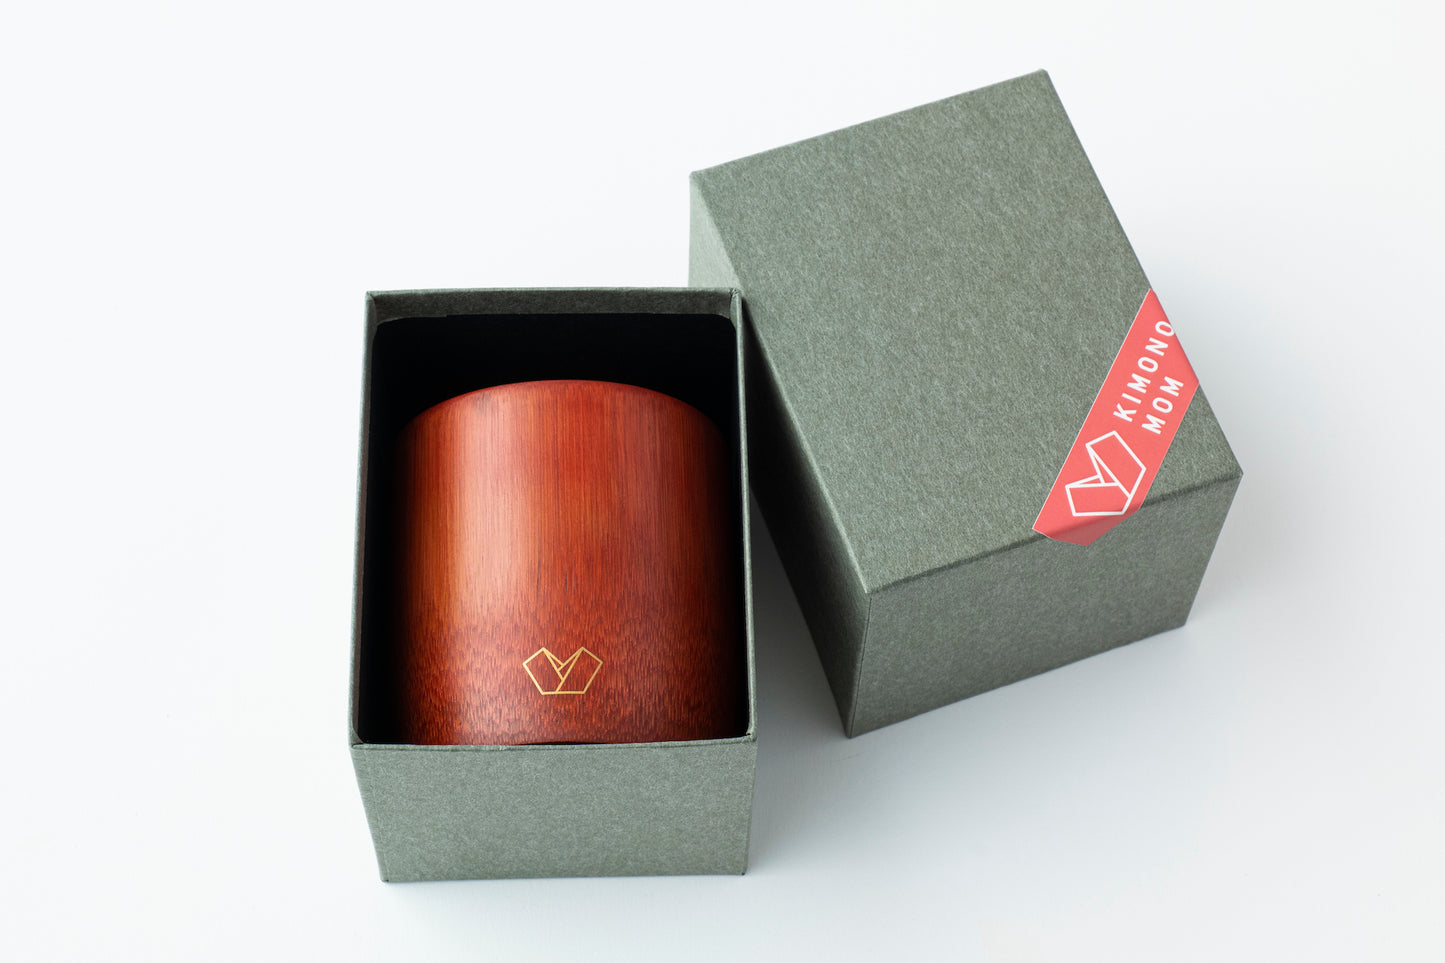 Bamboo Cup : Red